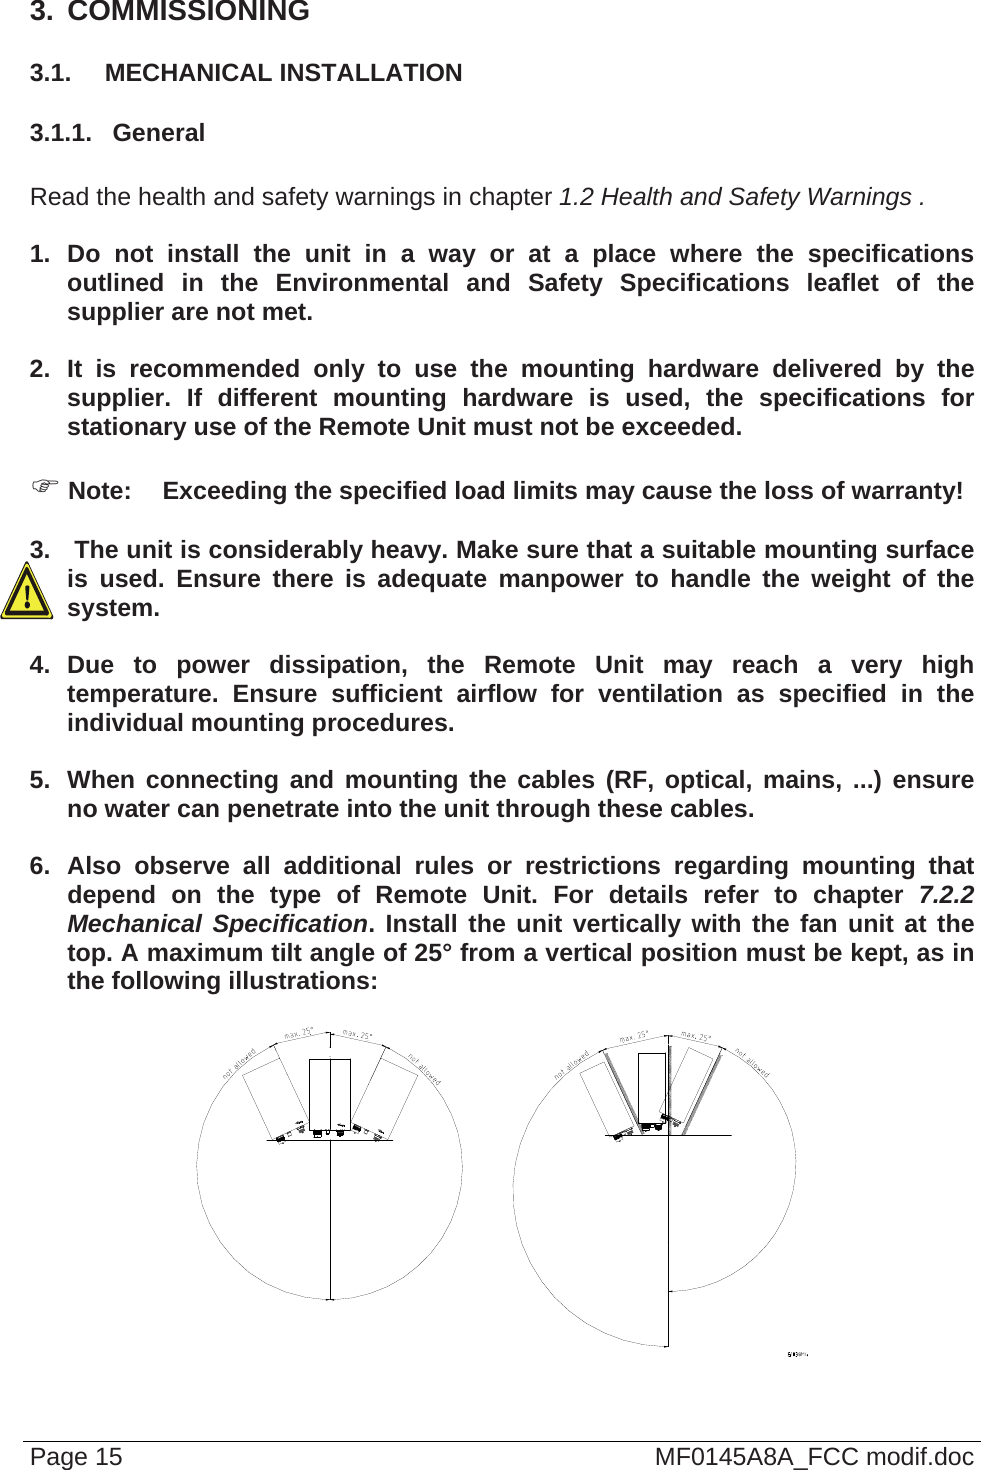  3.  COMMISSIONING 3.1.  MECHANICAL INSTALLATION 3.1.1.  General  Read the health and safety warnings in chapter 1.2 Health and Safety Warnings .  1. Do not install the unit in a way or at a place where the specifications outlined in the Environmental and Safety Specifications leaflet of the supplier are not met.  2. It is recommended only to use the mounting hardware delivered by the supplier. If different mounting hardware is used, the specifications for stationary use of the Remote Unit must not be exceeded.   Note:  Exceeding the specified load limits may cause the loss of warranty!  3.   The unit is considerably heavy. Make sure that a suitable mounting surface is used. Ensure there is adequate manpower to handle the weight of the system.  4. Due to power dissipation, the Remote Unit may reach a very high temperature. Ensure sufficient airflow for ventilation as specified in the individual mounting procedures.  5.  When connecting and mounting the cables (RF, optical, mains, ...) ensure no water can penetrate into the unit through these cables.  6. Also observe all additional rules or restrictions regarding mounting that depend on the type of Remote Unit. For details refer to chapter 7.2.2 Mechanical Specification. Install the unit vertically with the fan unit at the top. A maximum tilt angle of 25° from a vertical position must be kept, as in the following illustrations:   Page 15  MF0145A8A_FCC modif.doc 